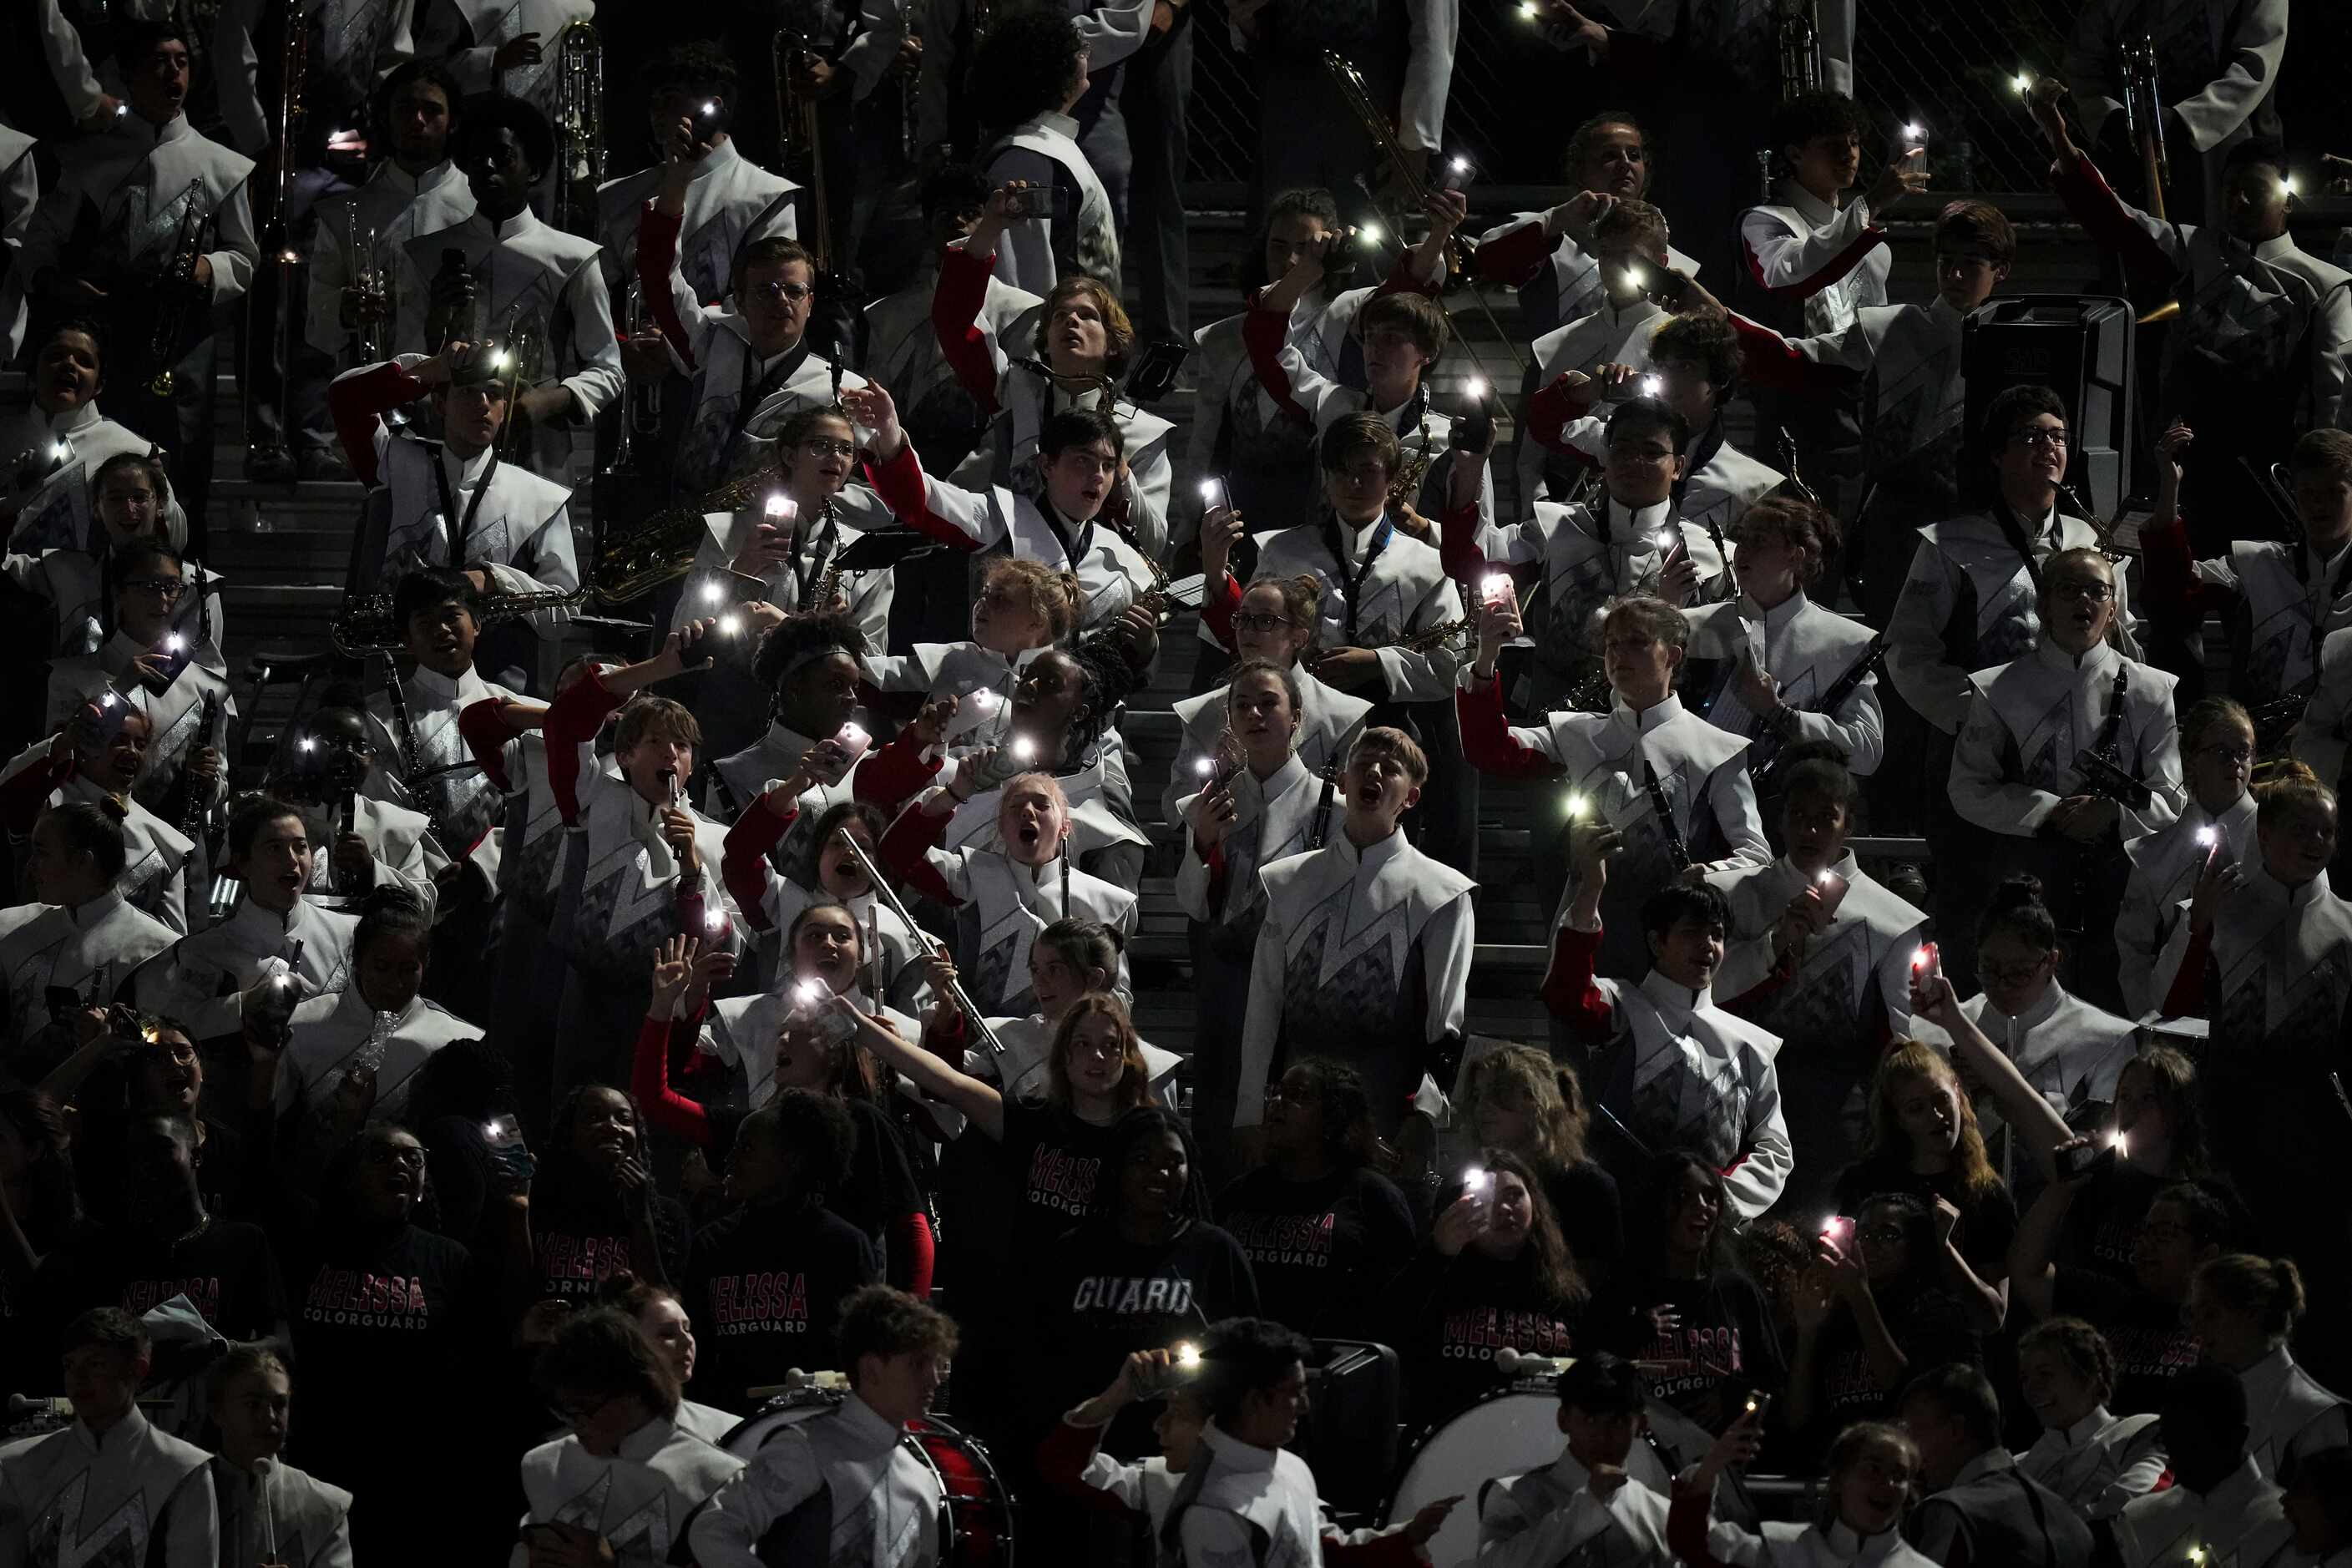 Members of the Melissa band hold up mobile phones as they participate in a Lovejoy crowd...